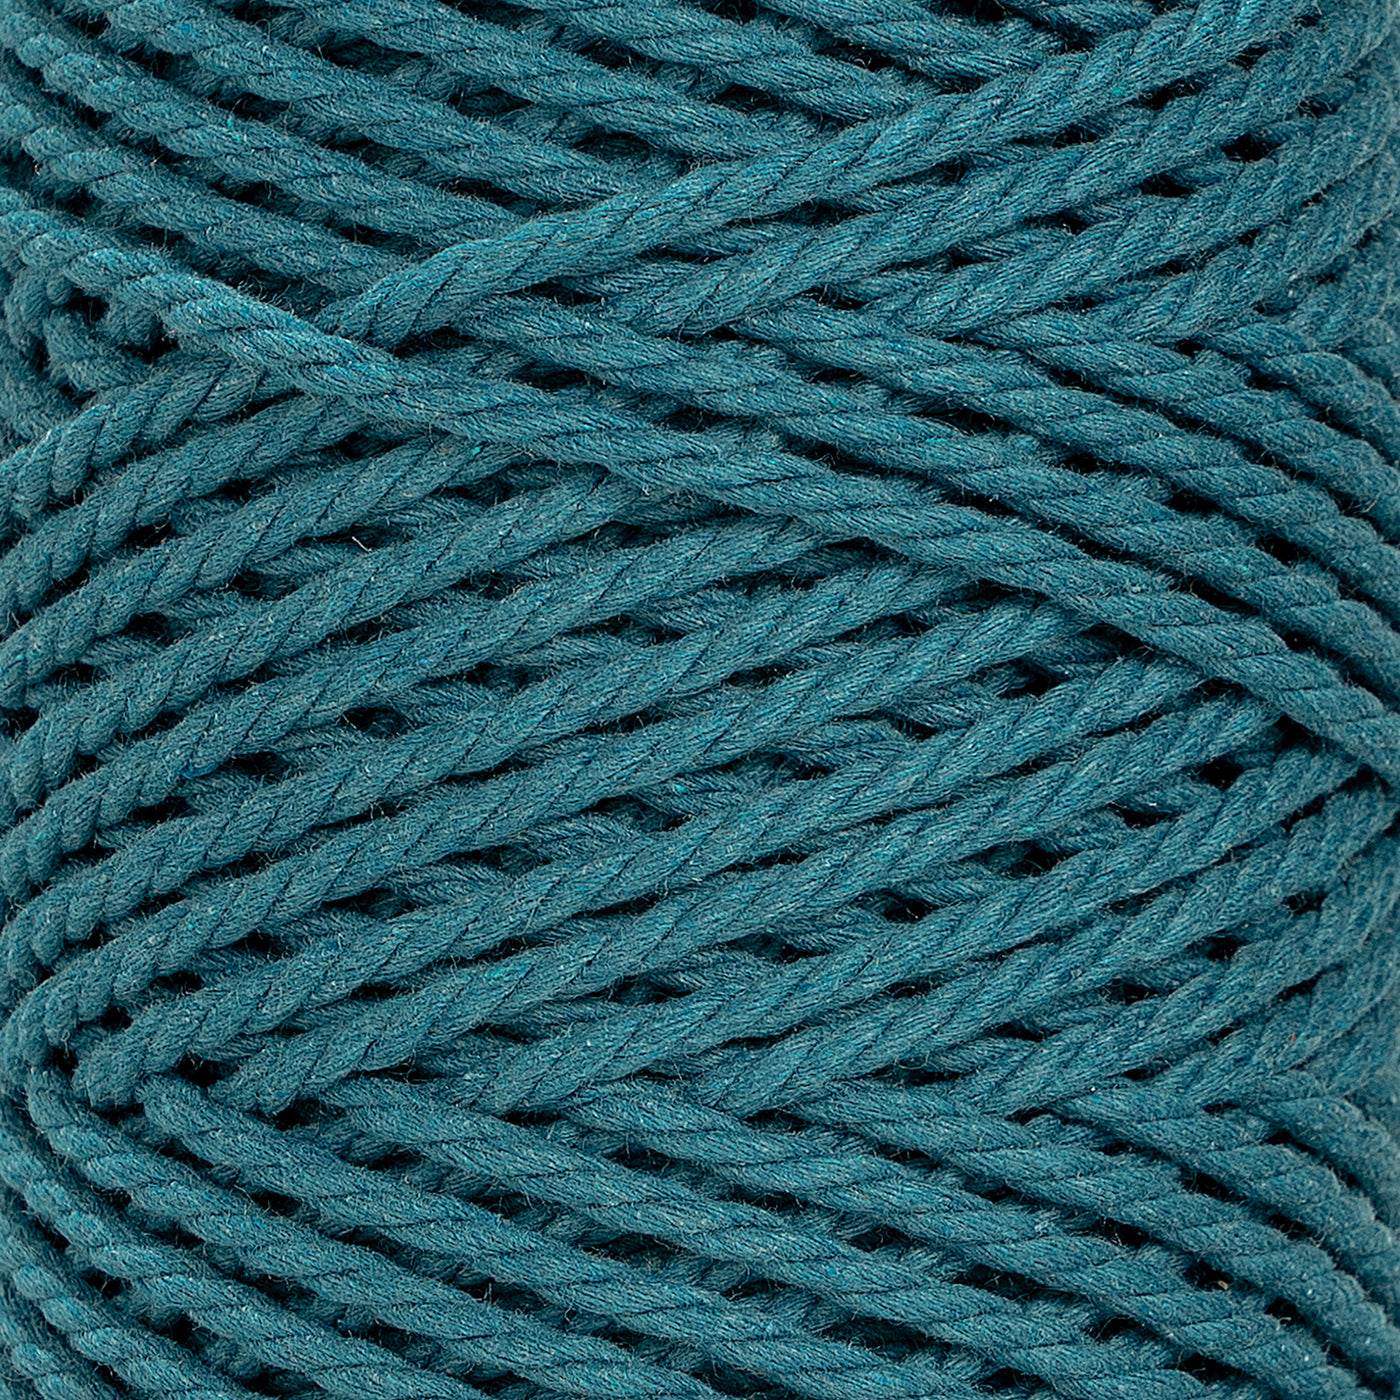 COTTON ROPE ZERO WASTE 3 MM - 3 PLY - OCEAN TEAL COLOR